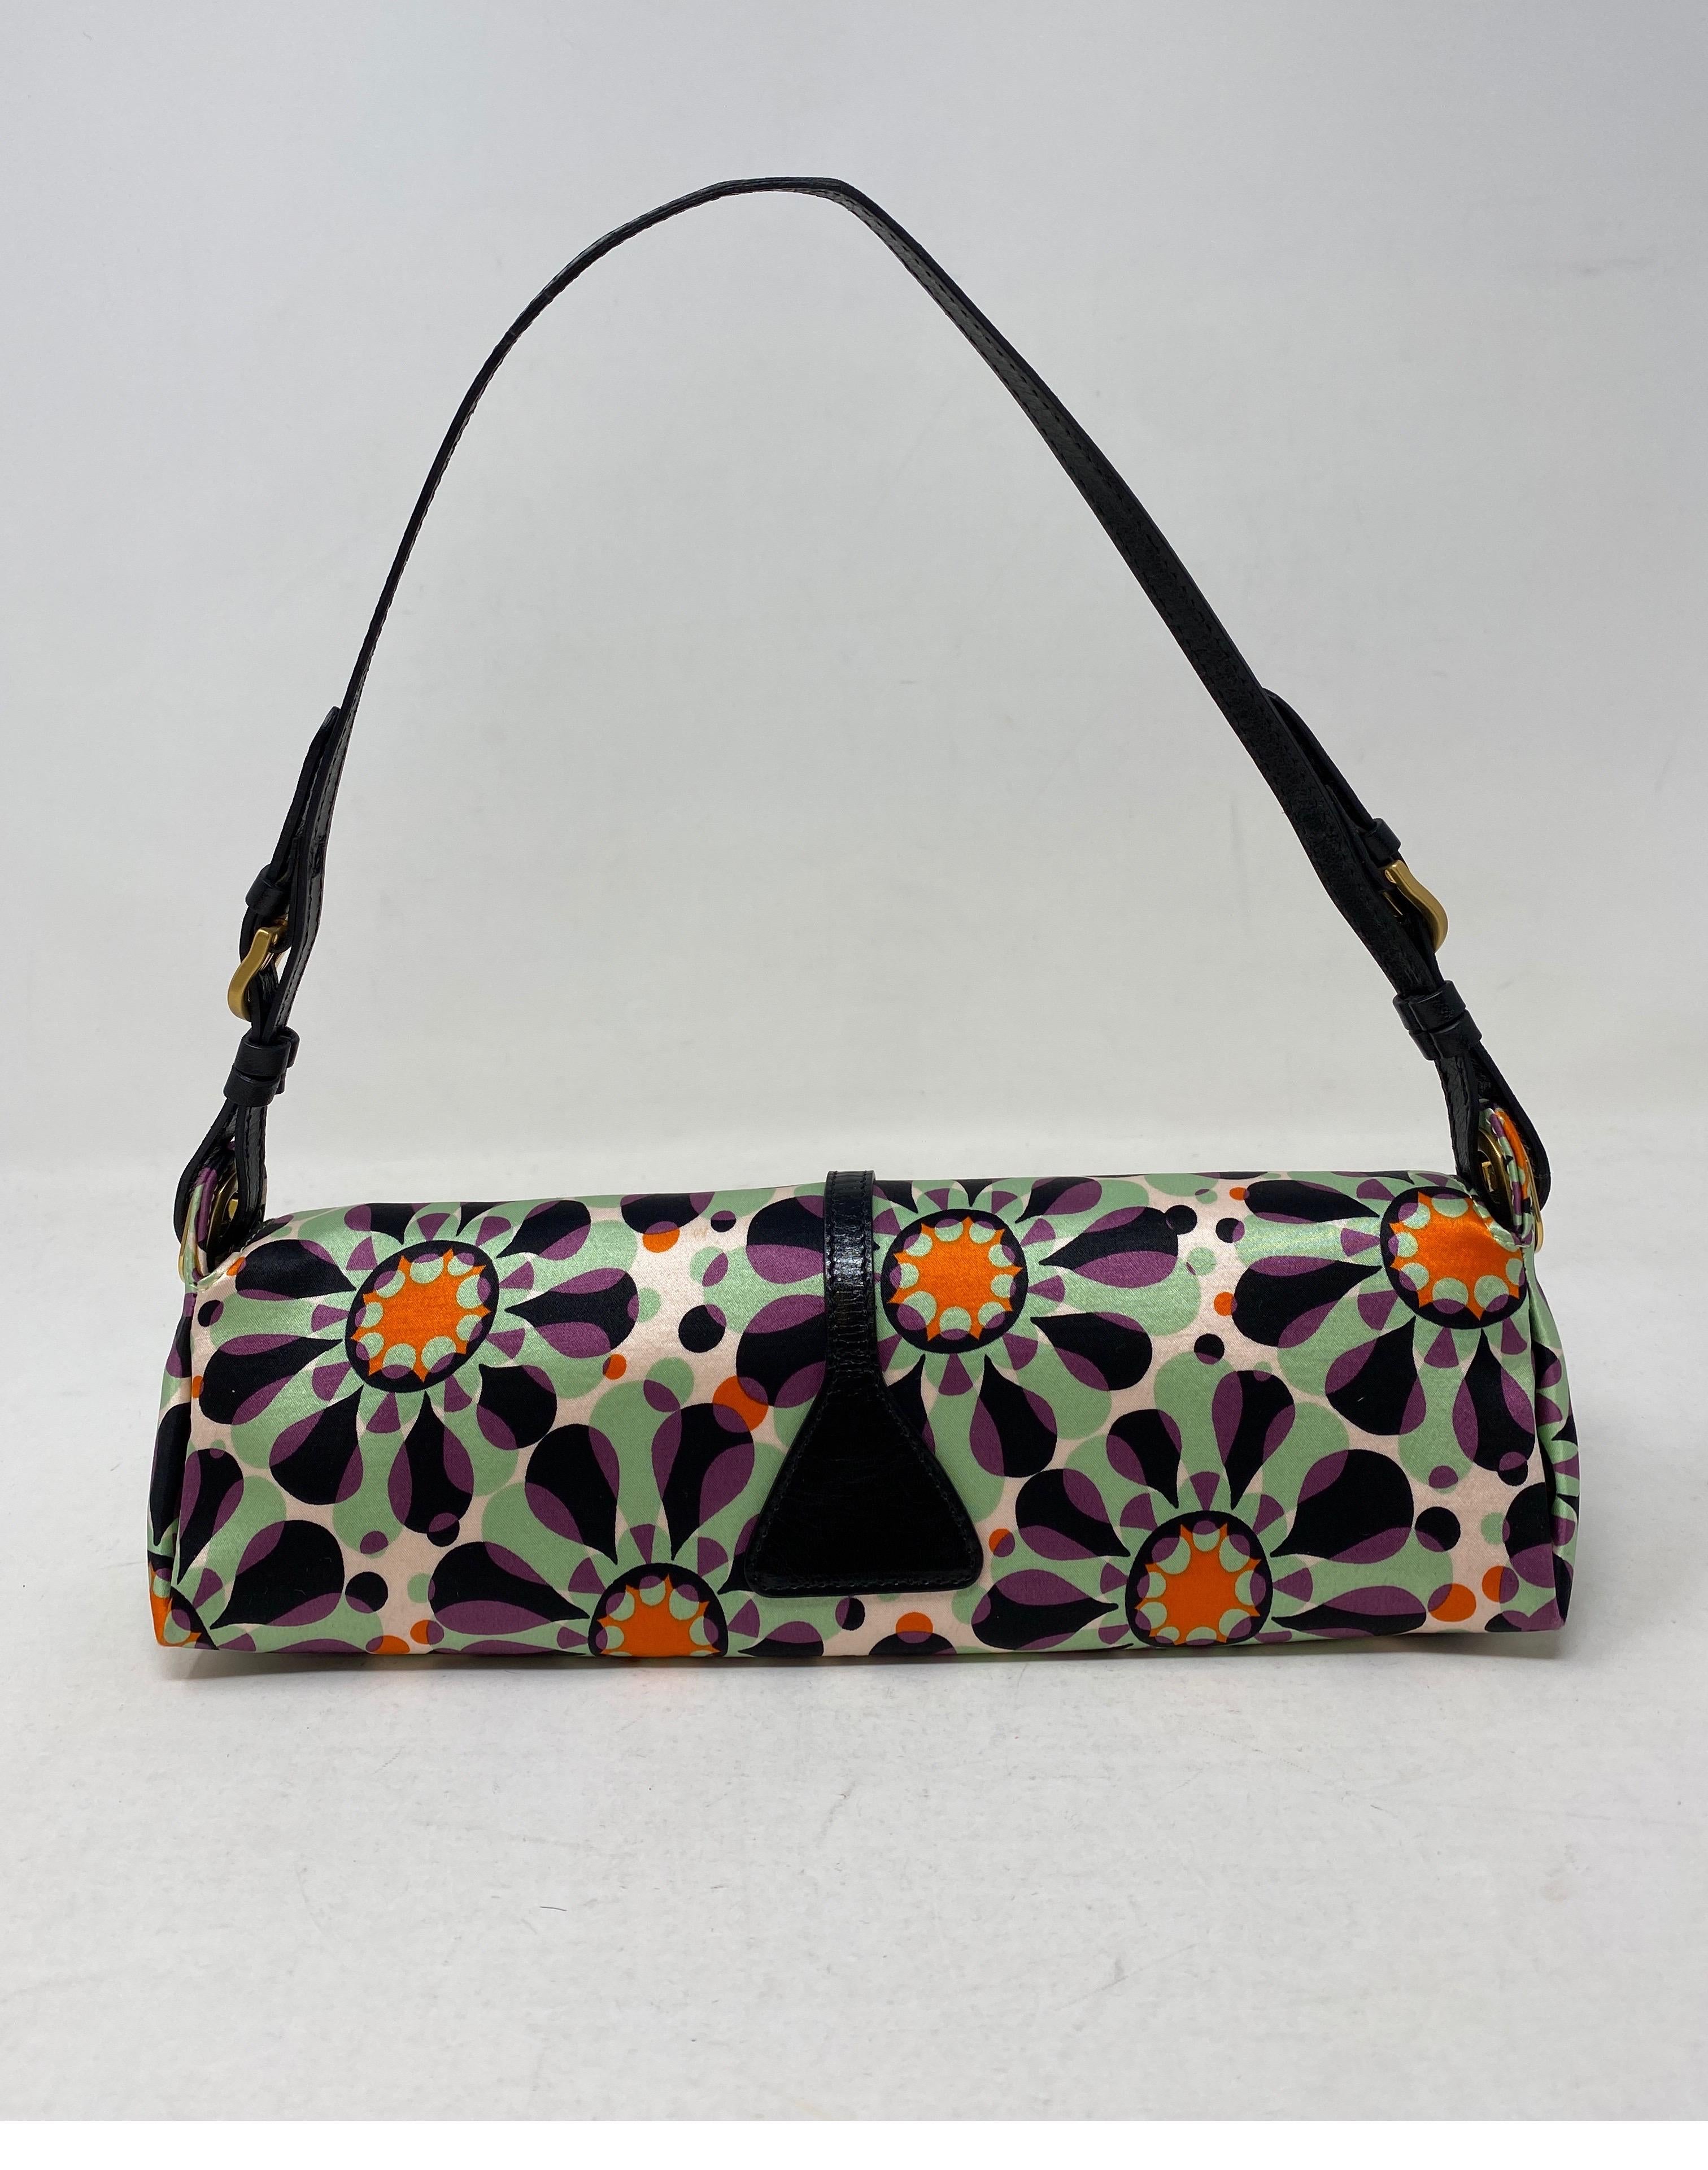 Jimmy Choo purse in groovy psychedelic print. Satin in pristine condition with gold hardware and leather strap. Baguette style bag. On trend now. Whimsical and fun bag. Guaranteed authentic. 